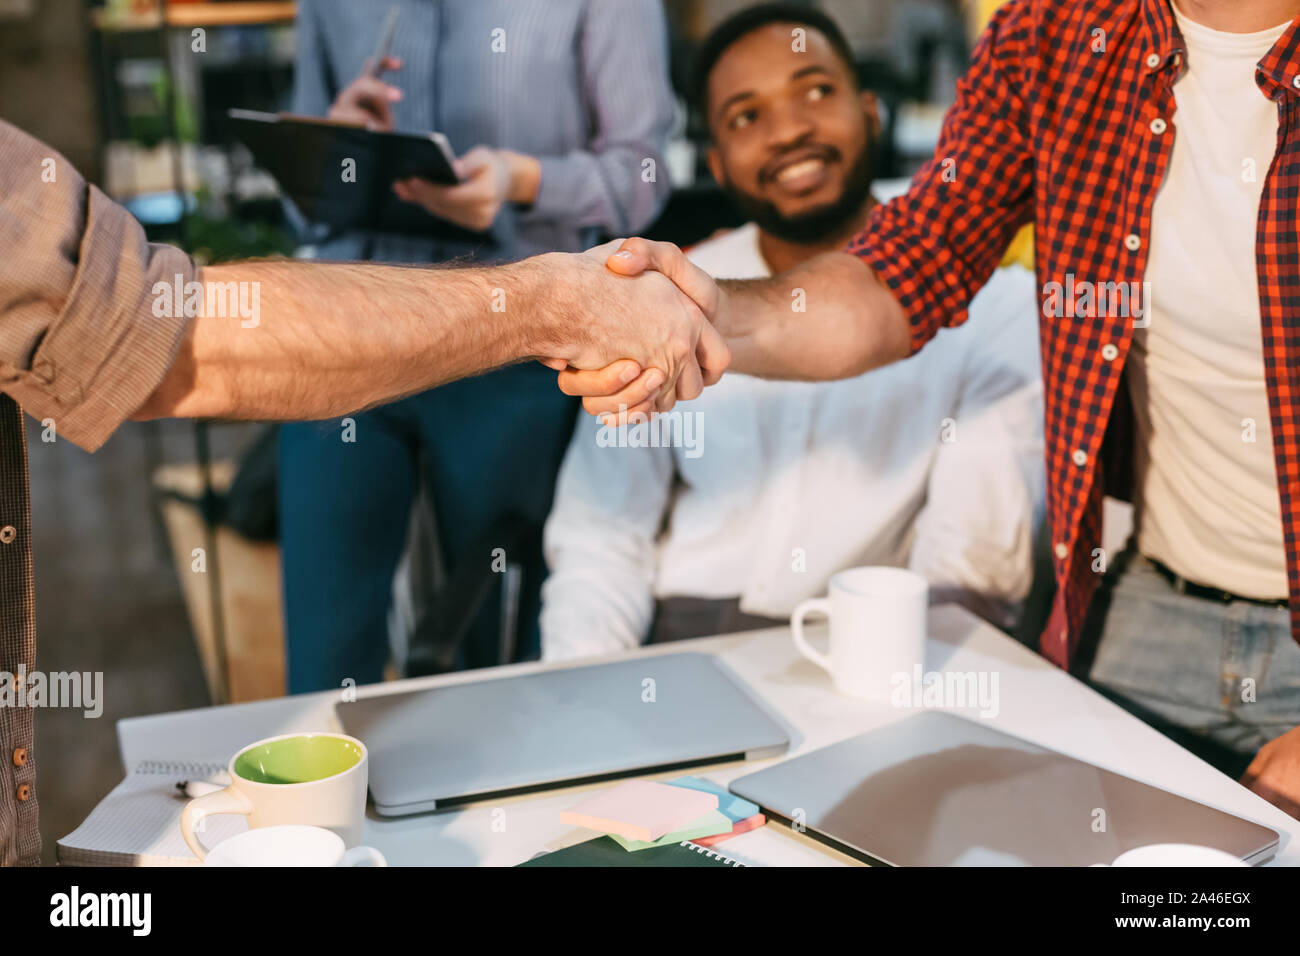 Successful deal. Businessman shaking hands with business partner Stock Photo